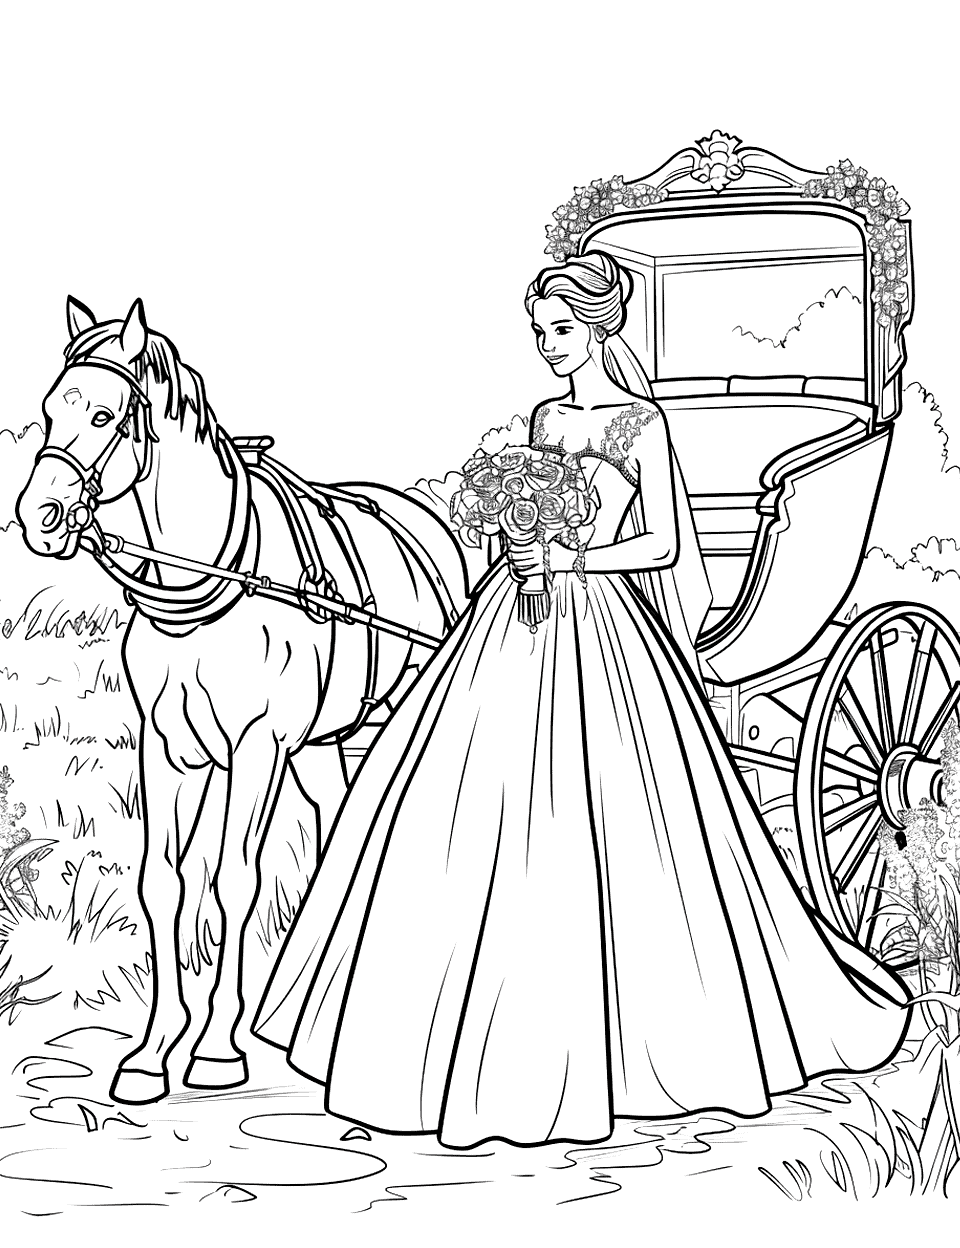 Horse-Drawn Carriage Arrival Wedding Coloring Page - A bride arriving at her wedding in a horse-drawn carriage.